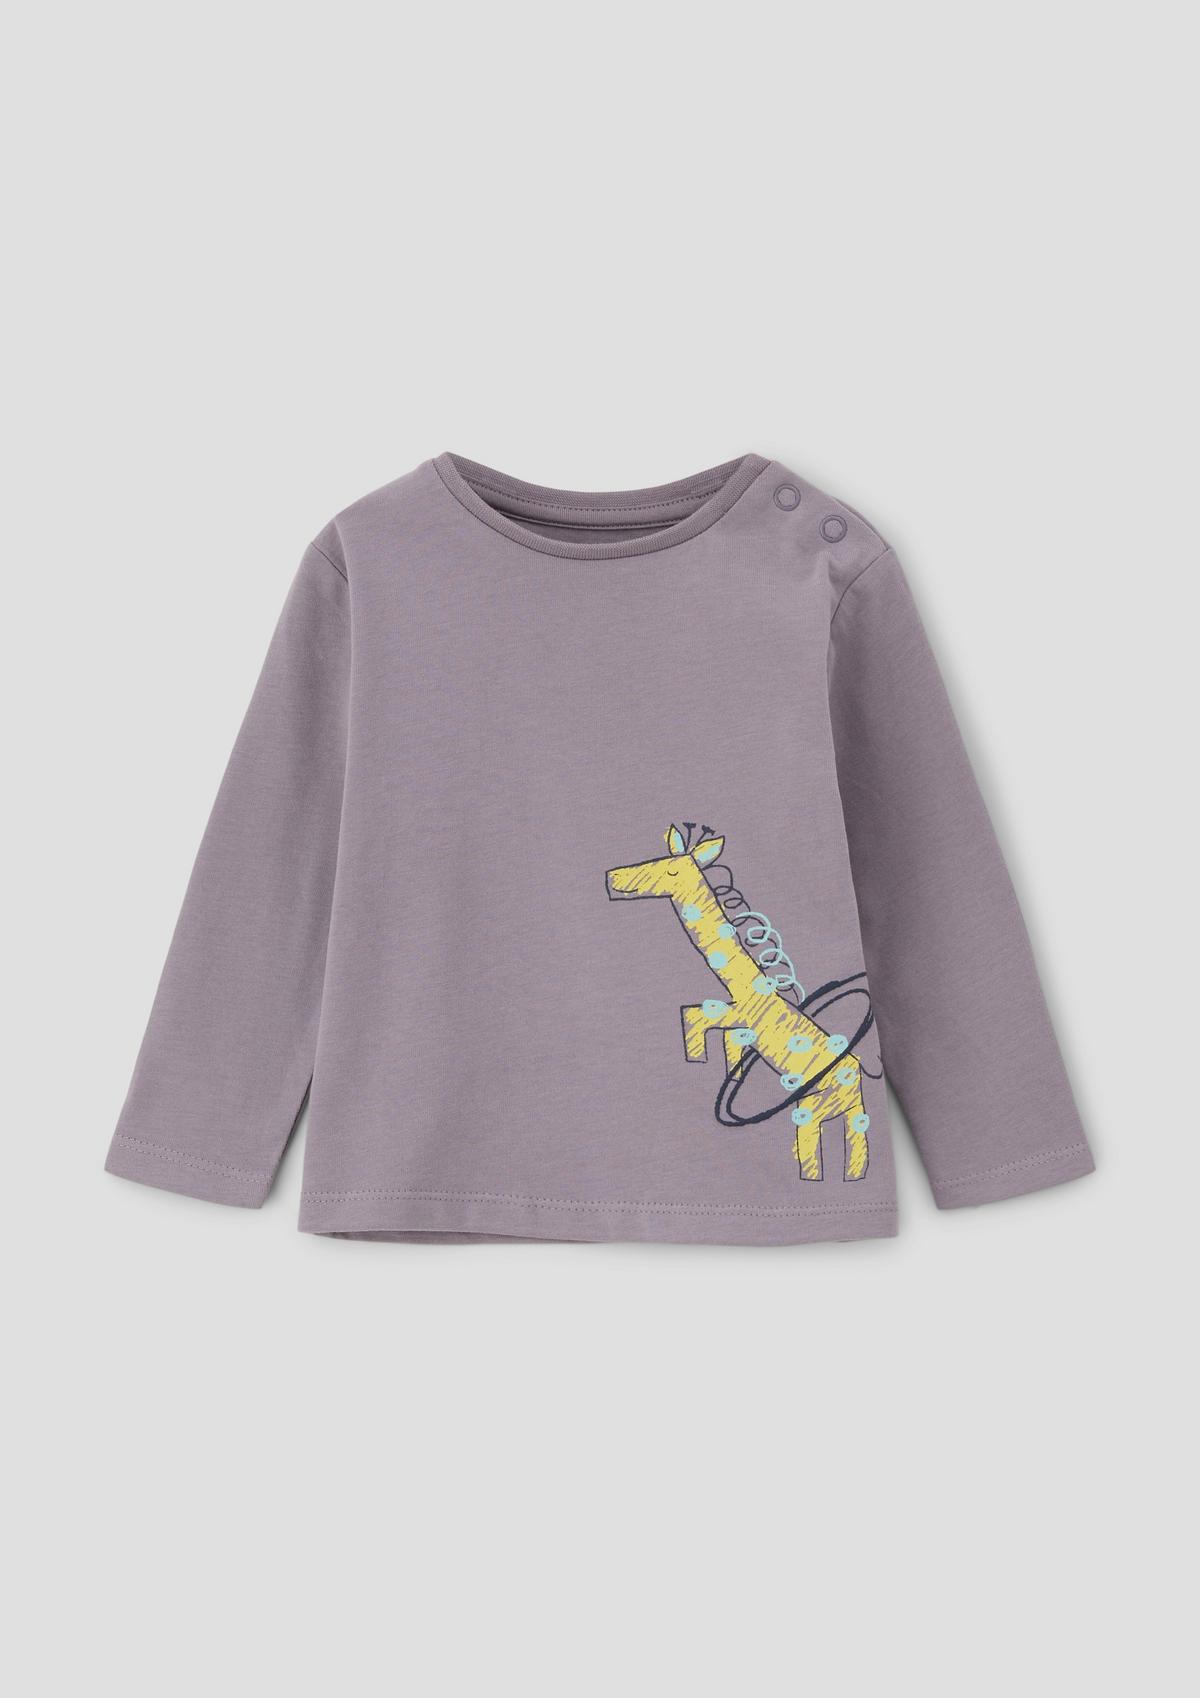 s.Oliver Long sleeve top with artwork